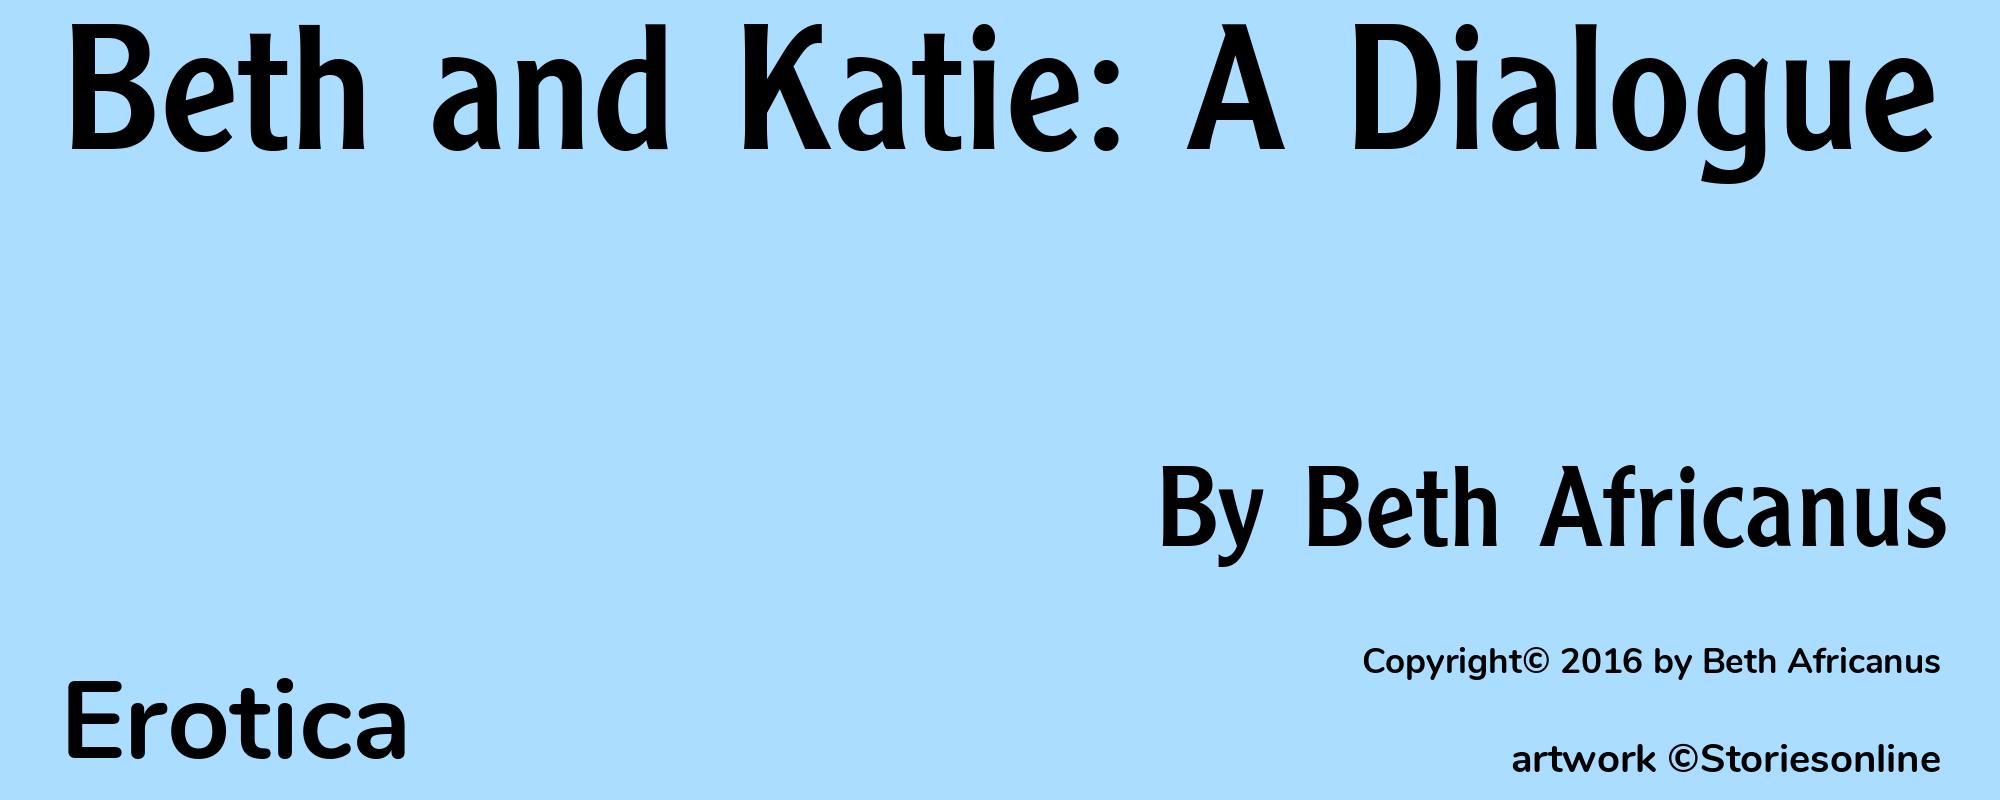 Beth and Katie: A Dialogue - Cover